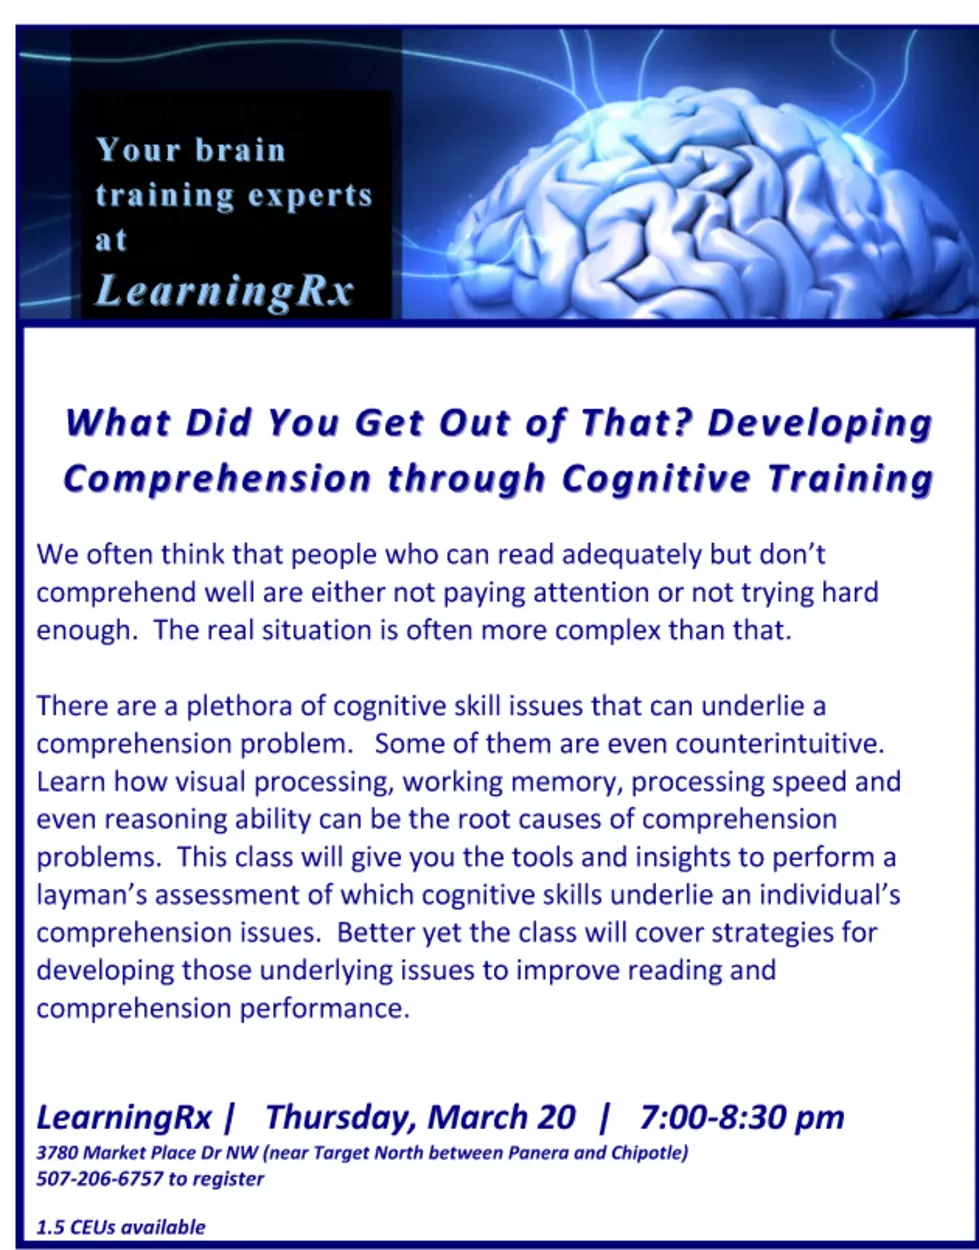 Learning RX: Cognitive Training